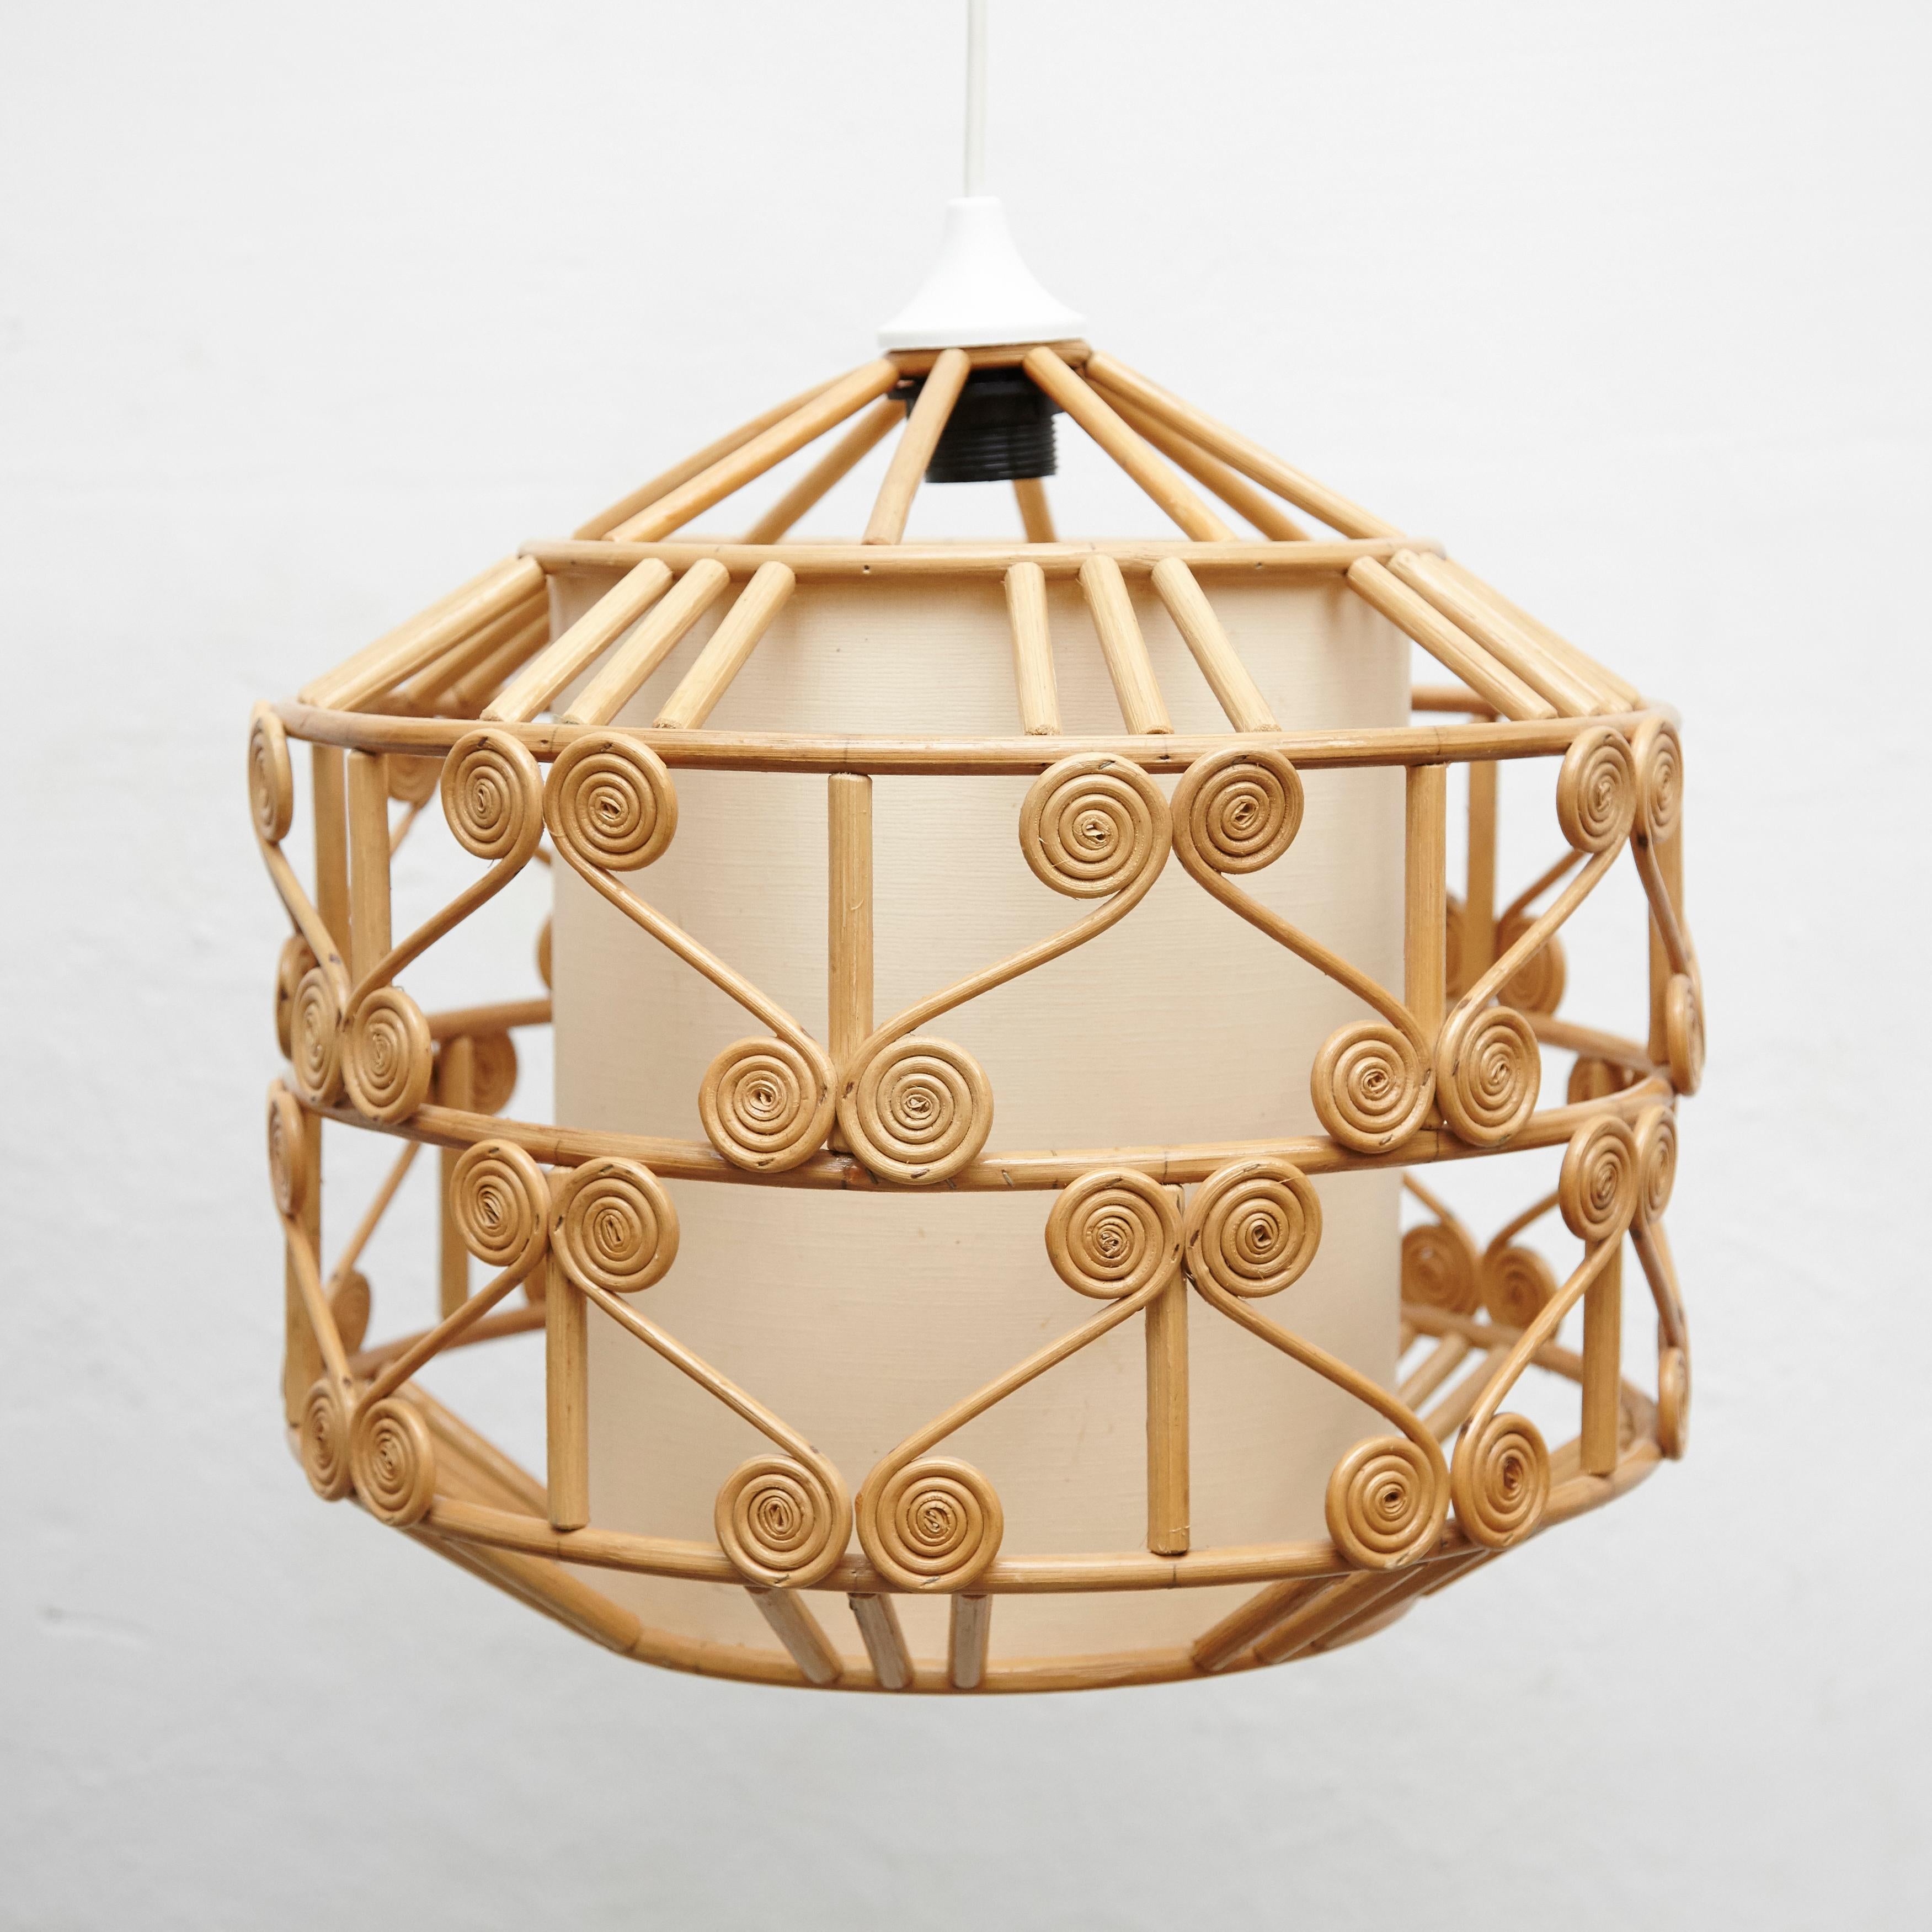 Rustic traditional rattan ceiling lamp by unknown artisan, Spain, circa 1980.
In original condition, with minor wear consistent with age and use, preserving a beautiful patina.

Materials:
Rattan

Dimensions:
Ø 41 cm x H 41 cm.